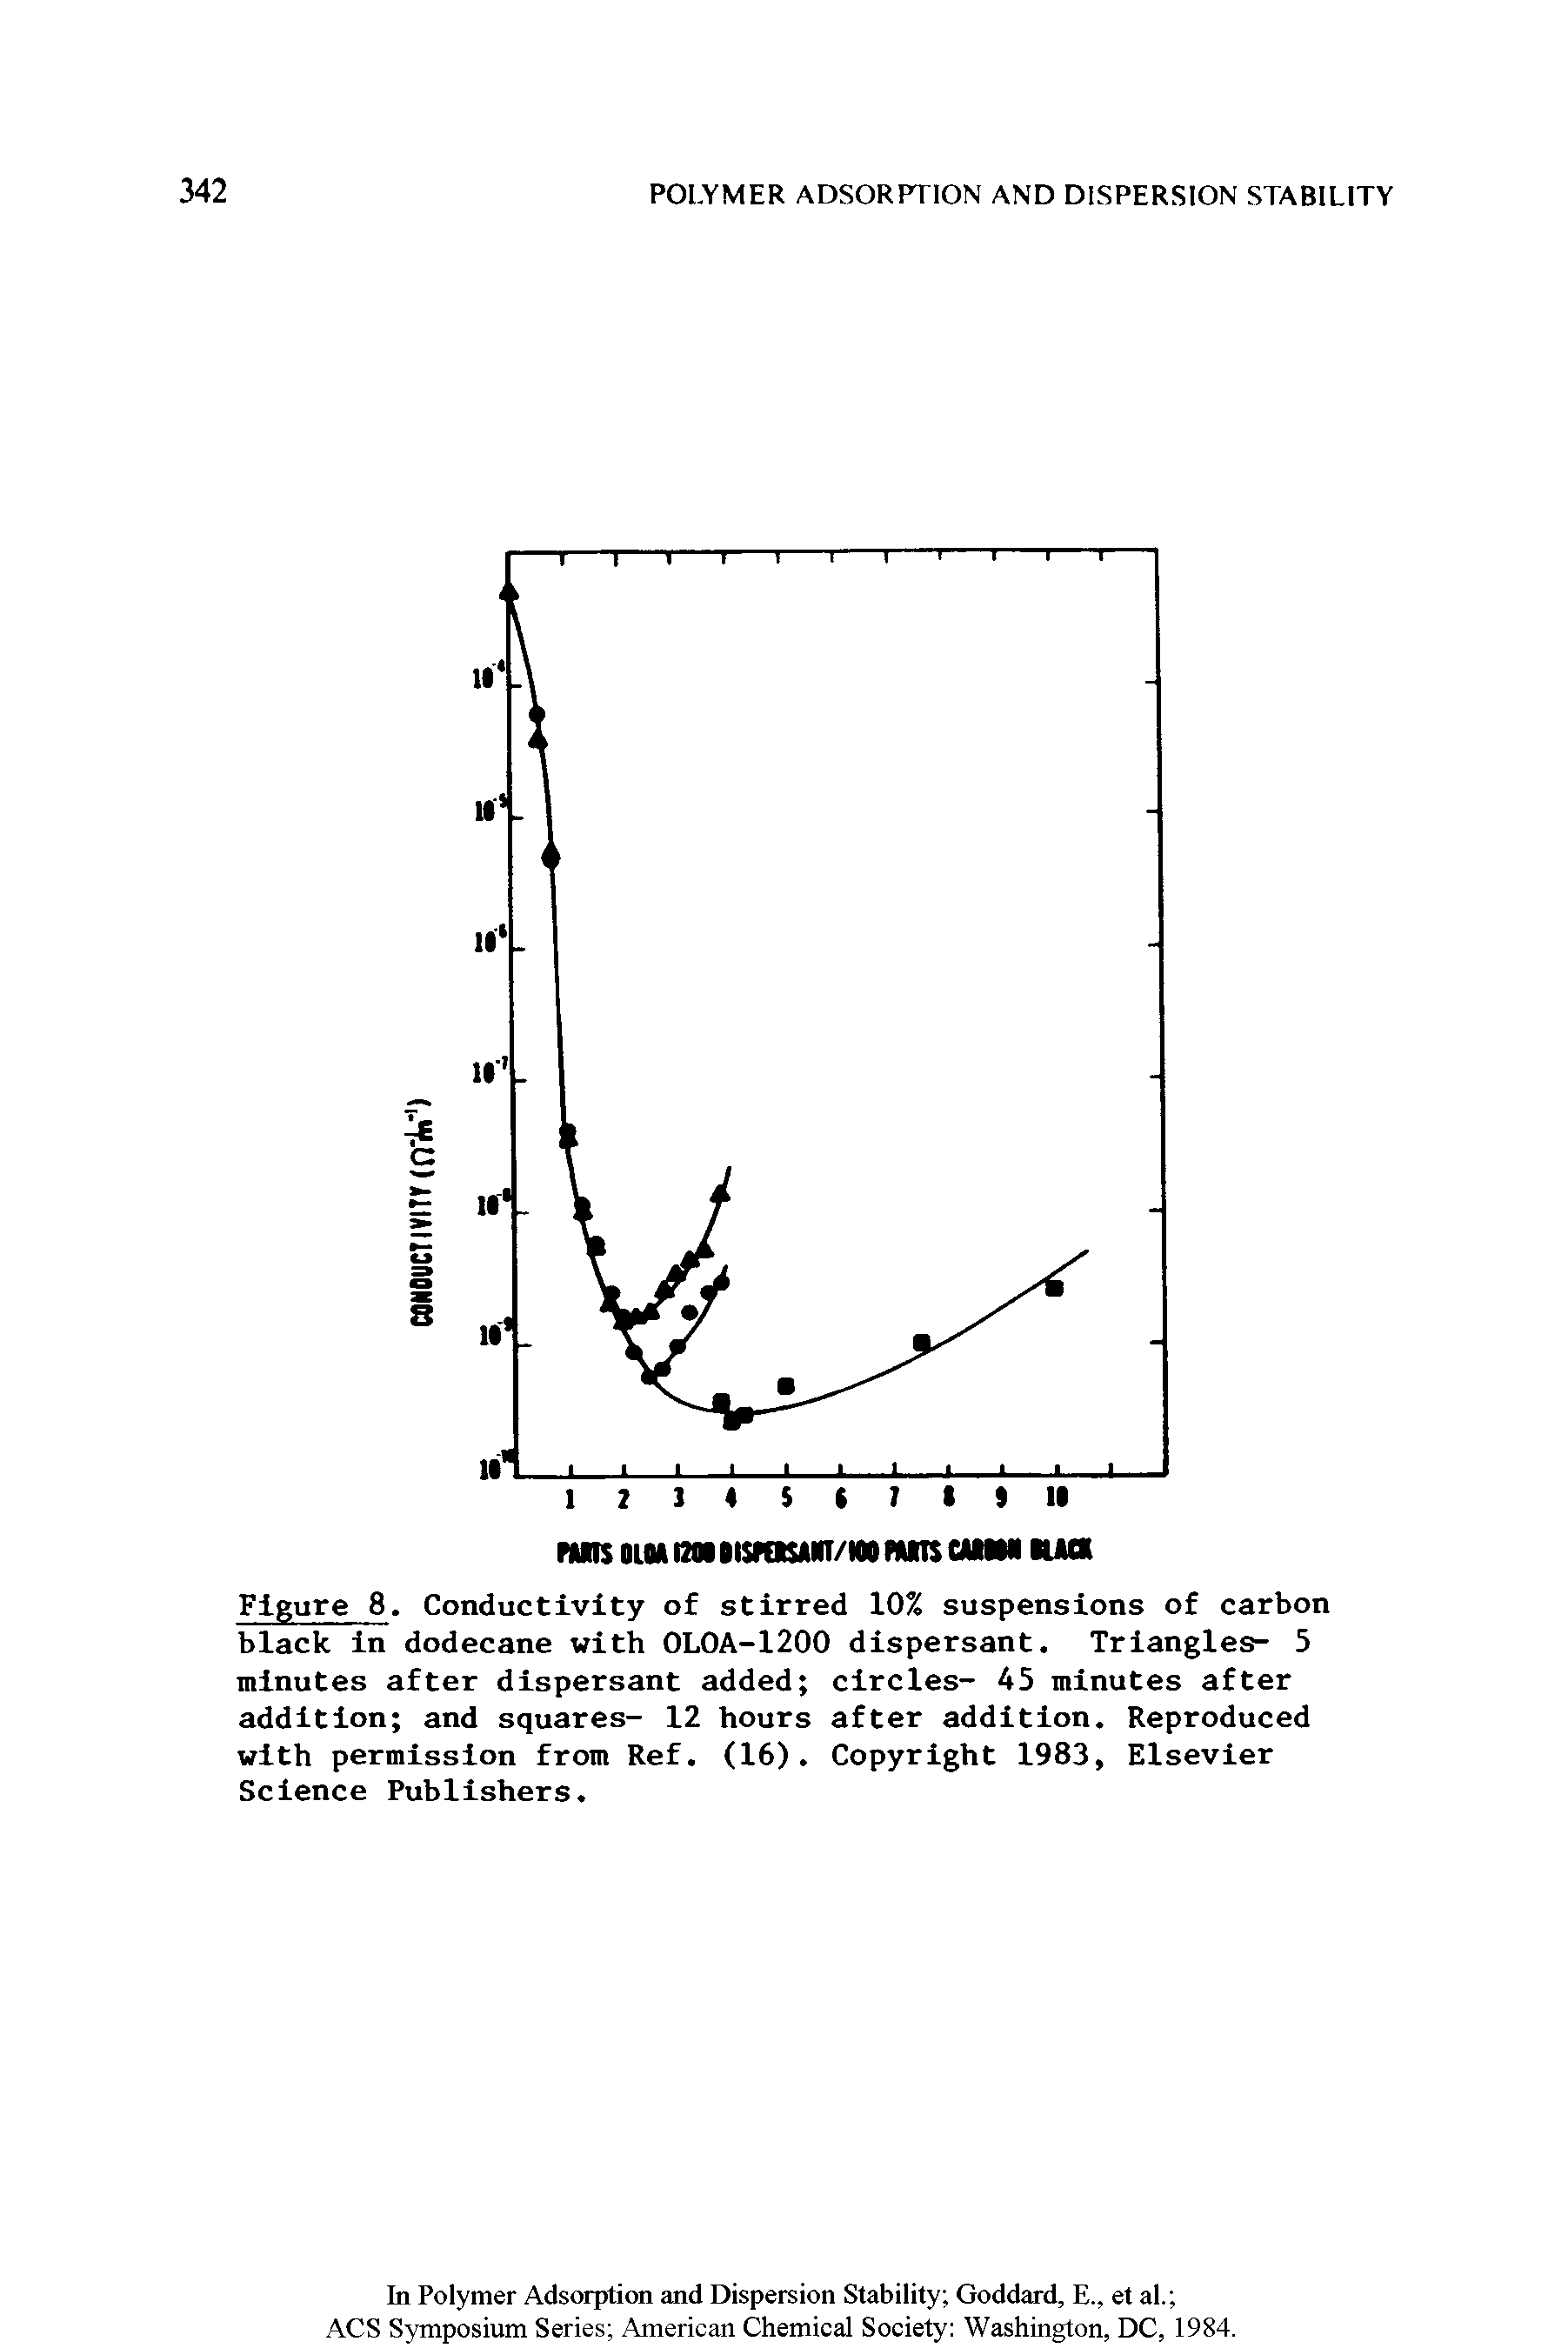 Figure 8. Conductivity of stirred 10% suspensions of carbon black in dodecane with OLOA-1200 dispersant. Triangles- 5 minutes after dispersant added circles- 45 minutes after addition and squares- 12 hours after addition. Reproduced with permission from Ref. (16). Copyright 1983, Elsevier Science Publishers.